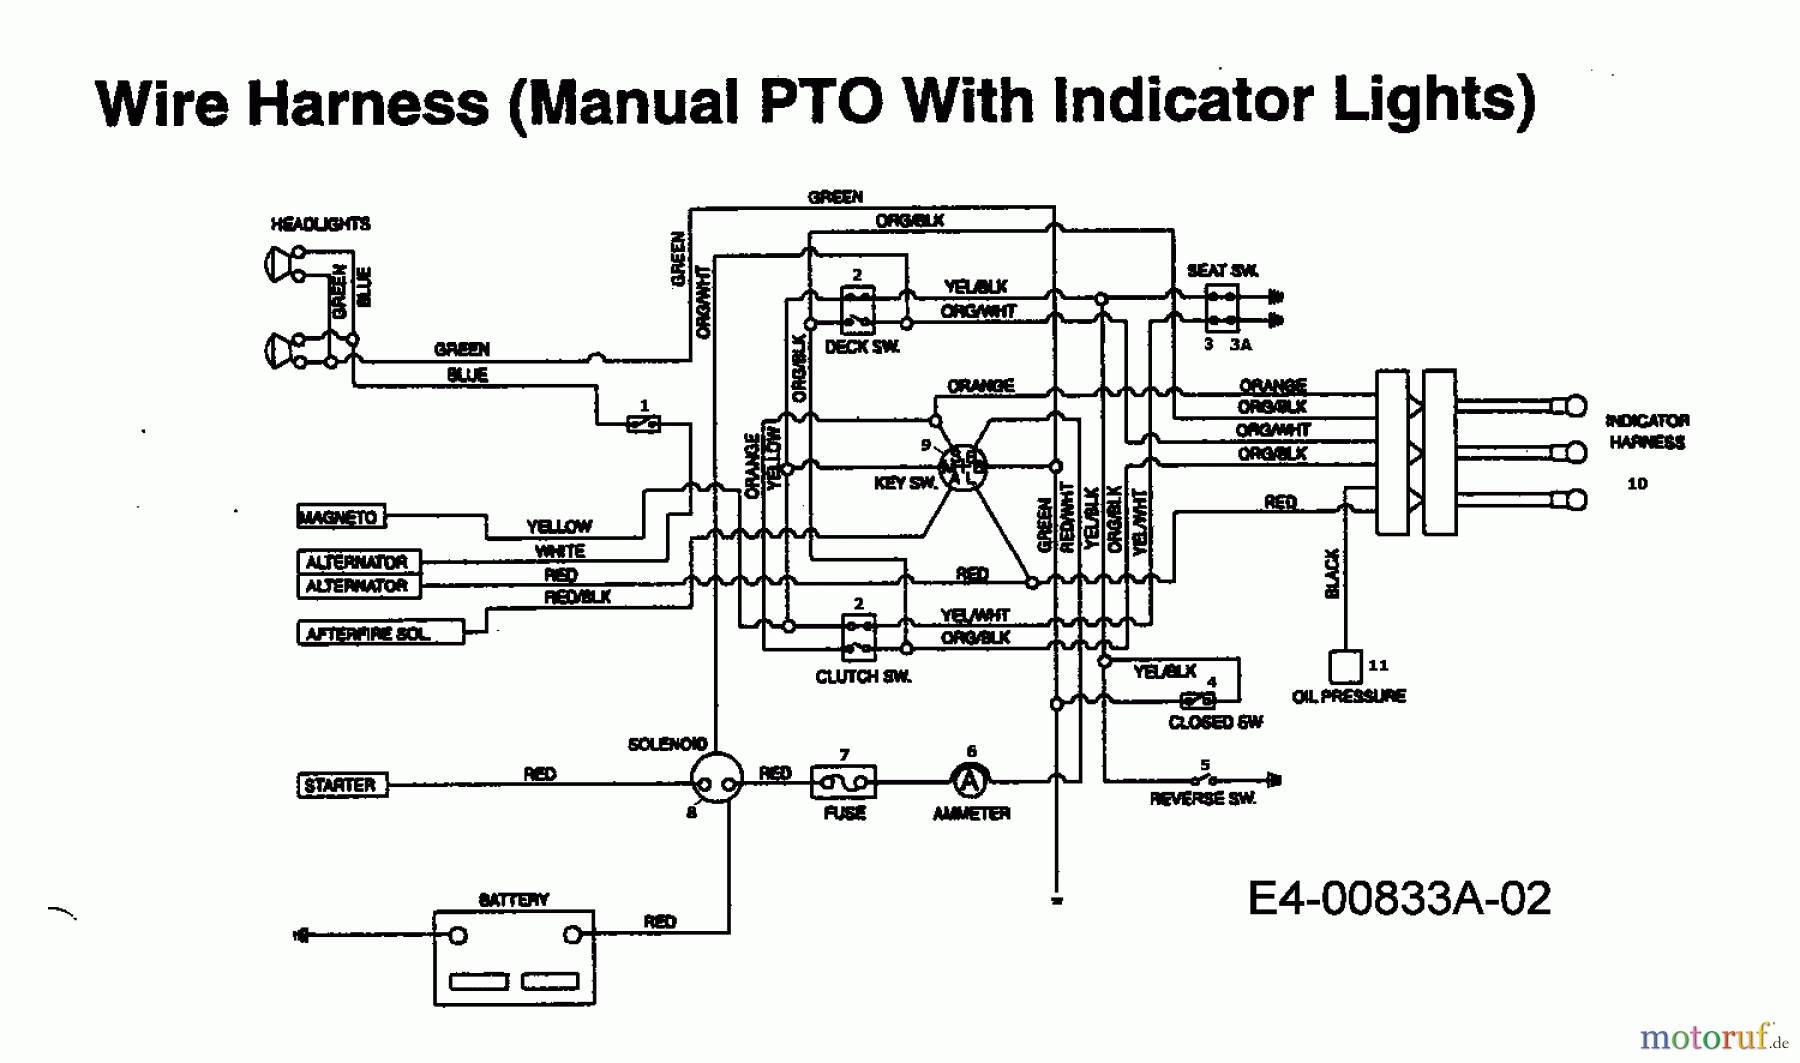  MTD Lawn tractors EH/130 13AA795N678  (1998) Wiring diagram with indicator lights